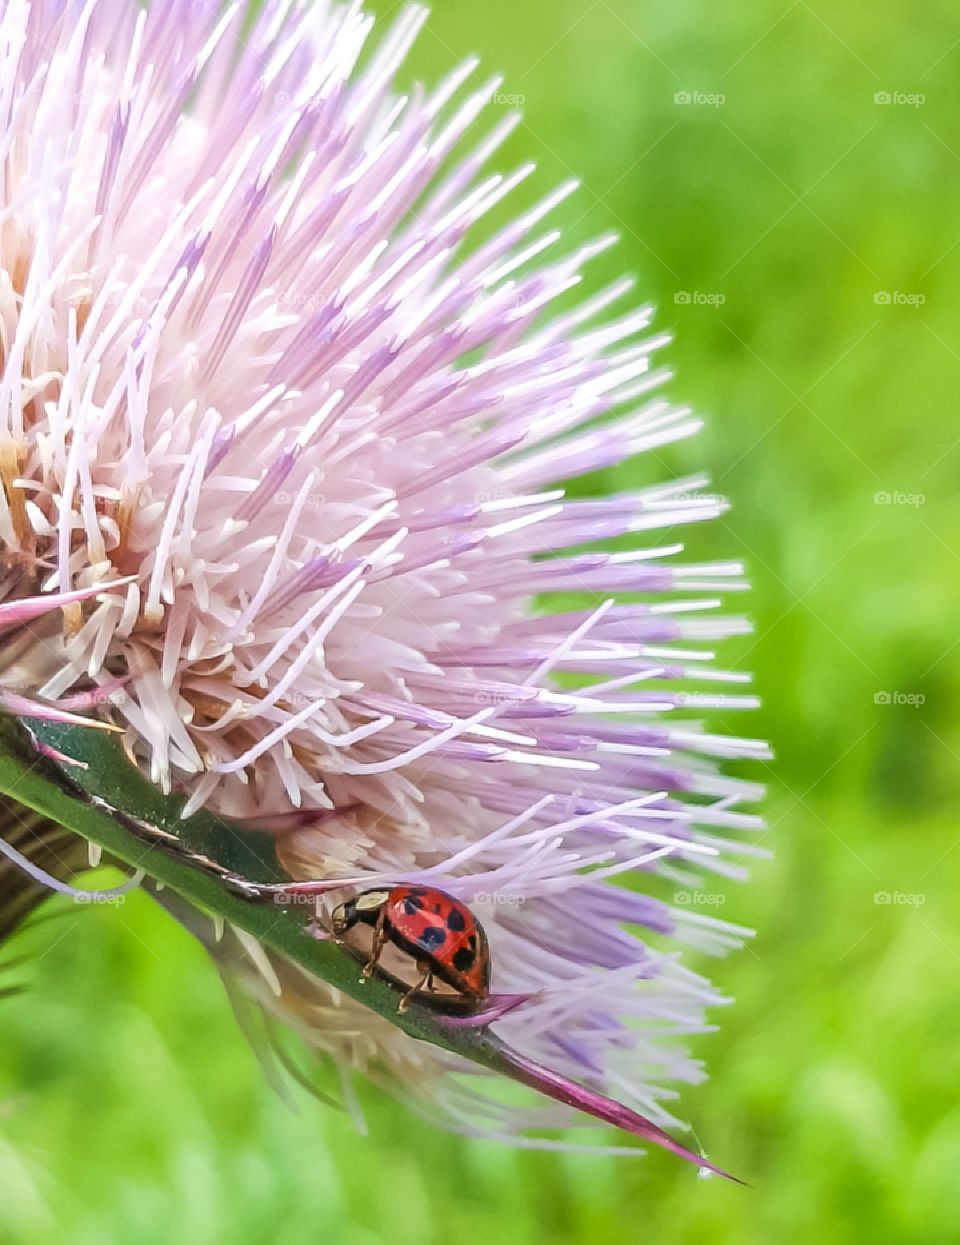 red ladybug on pink thistle flower outdoors